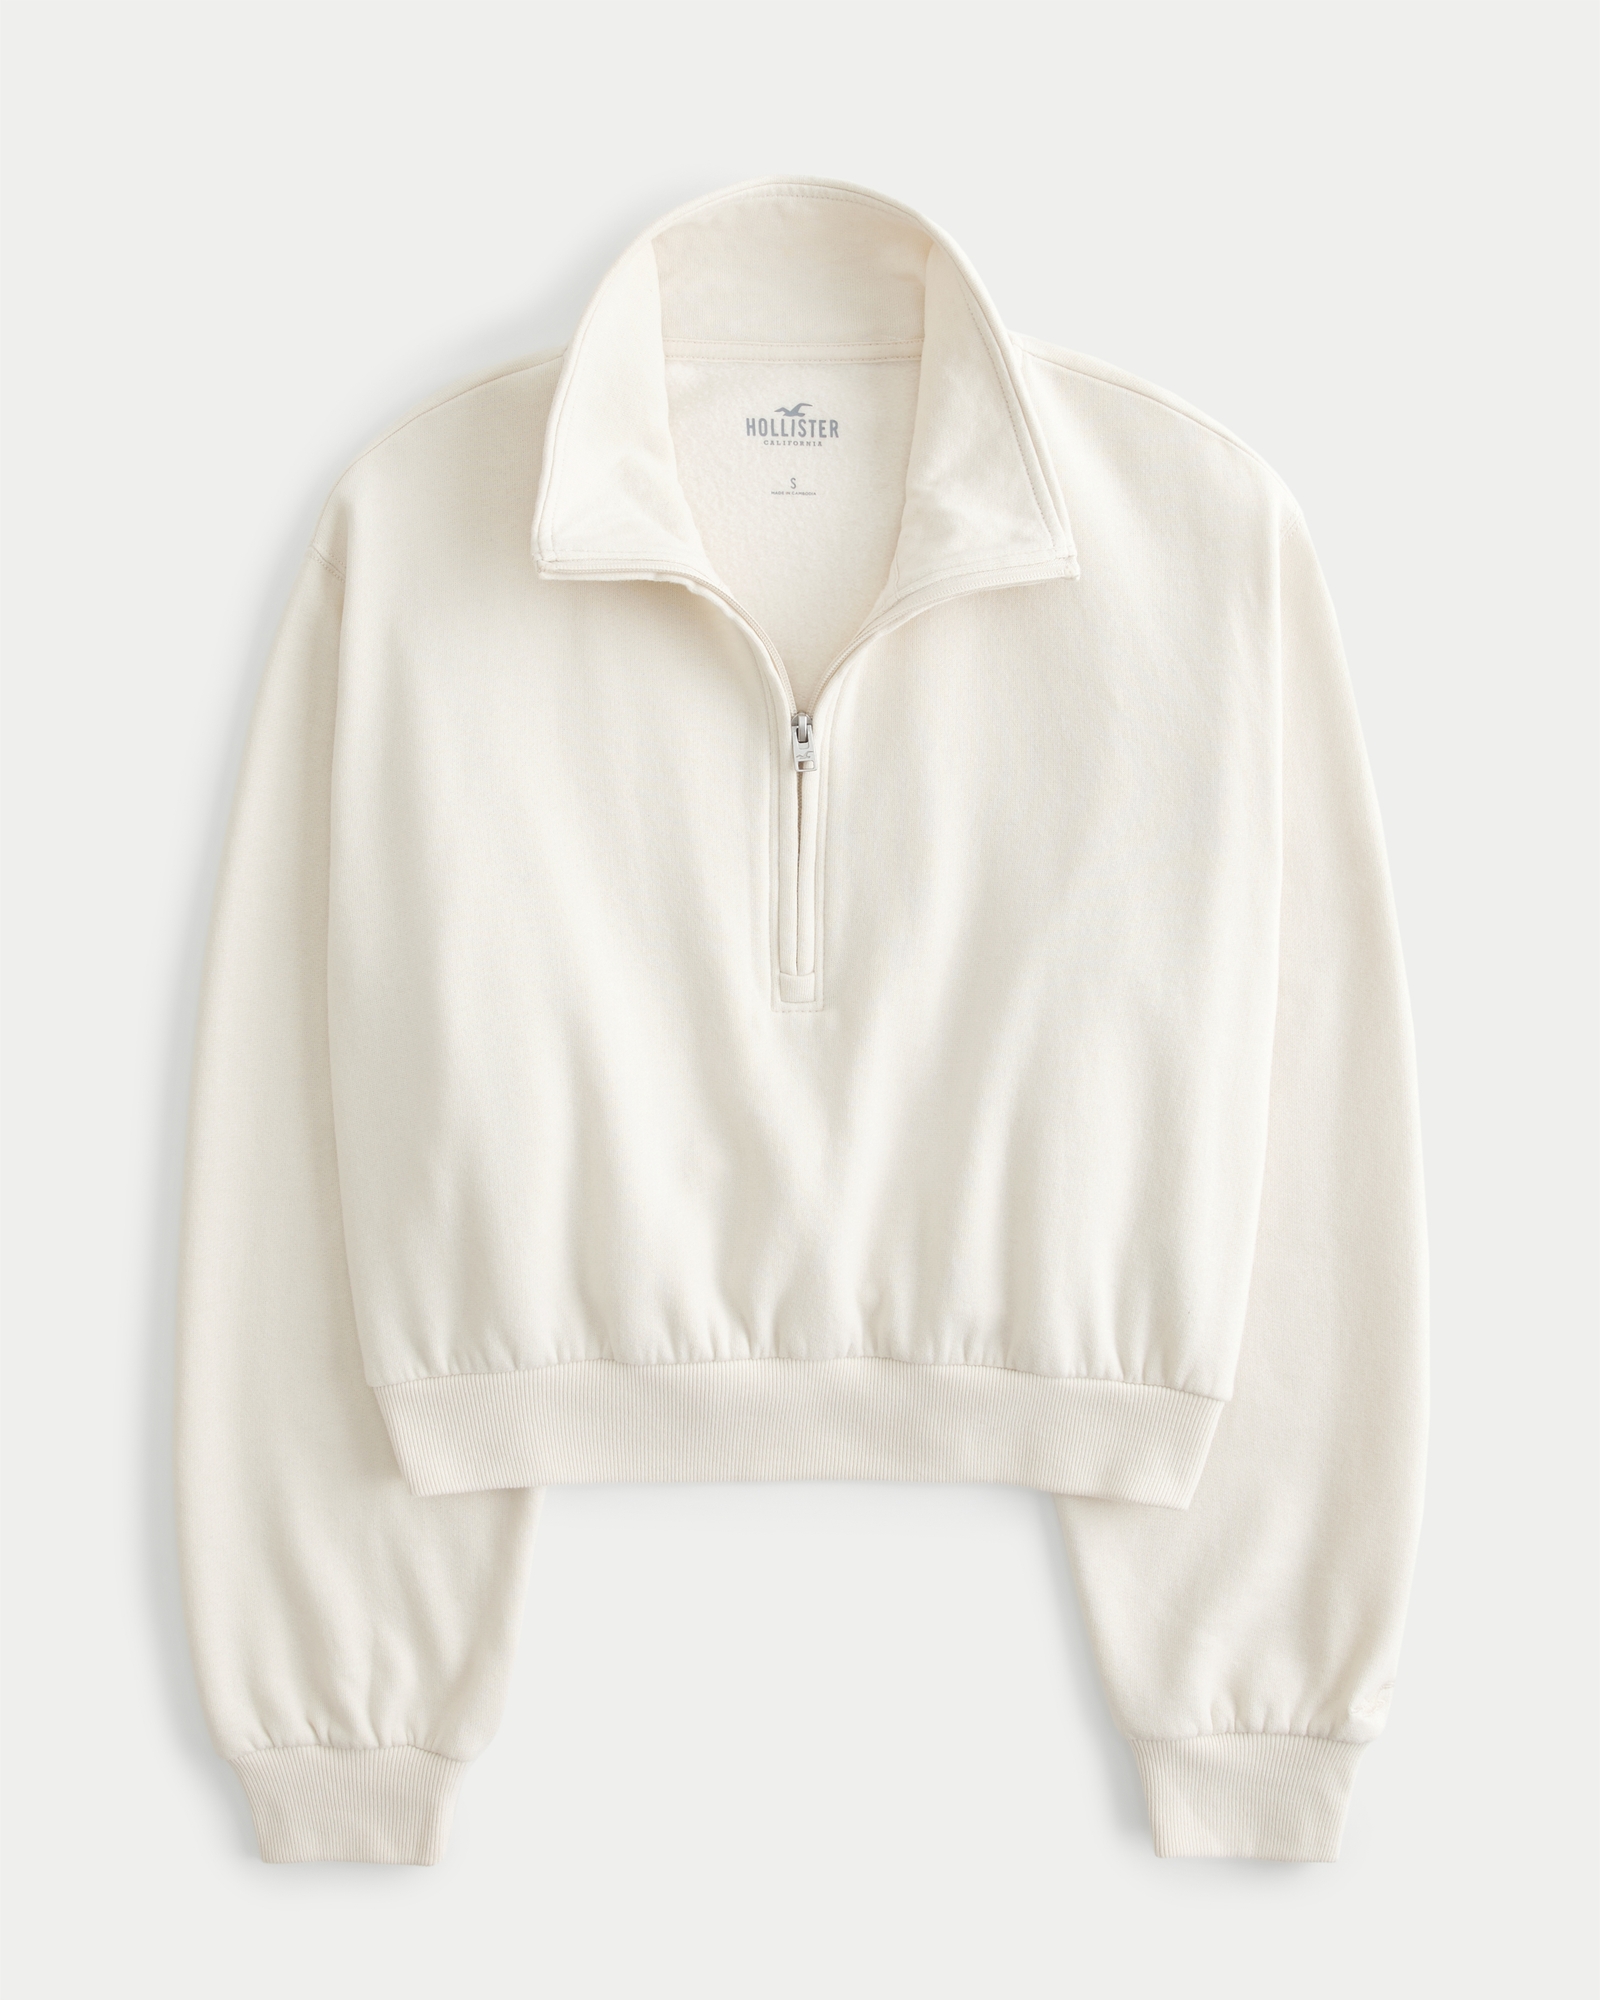 https://img.hollisterco.com/is/image/anf/KIC_352-3156-0023-178_prod1.jpg?policy=product-extra-large